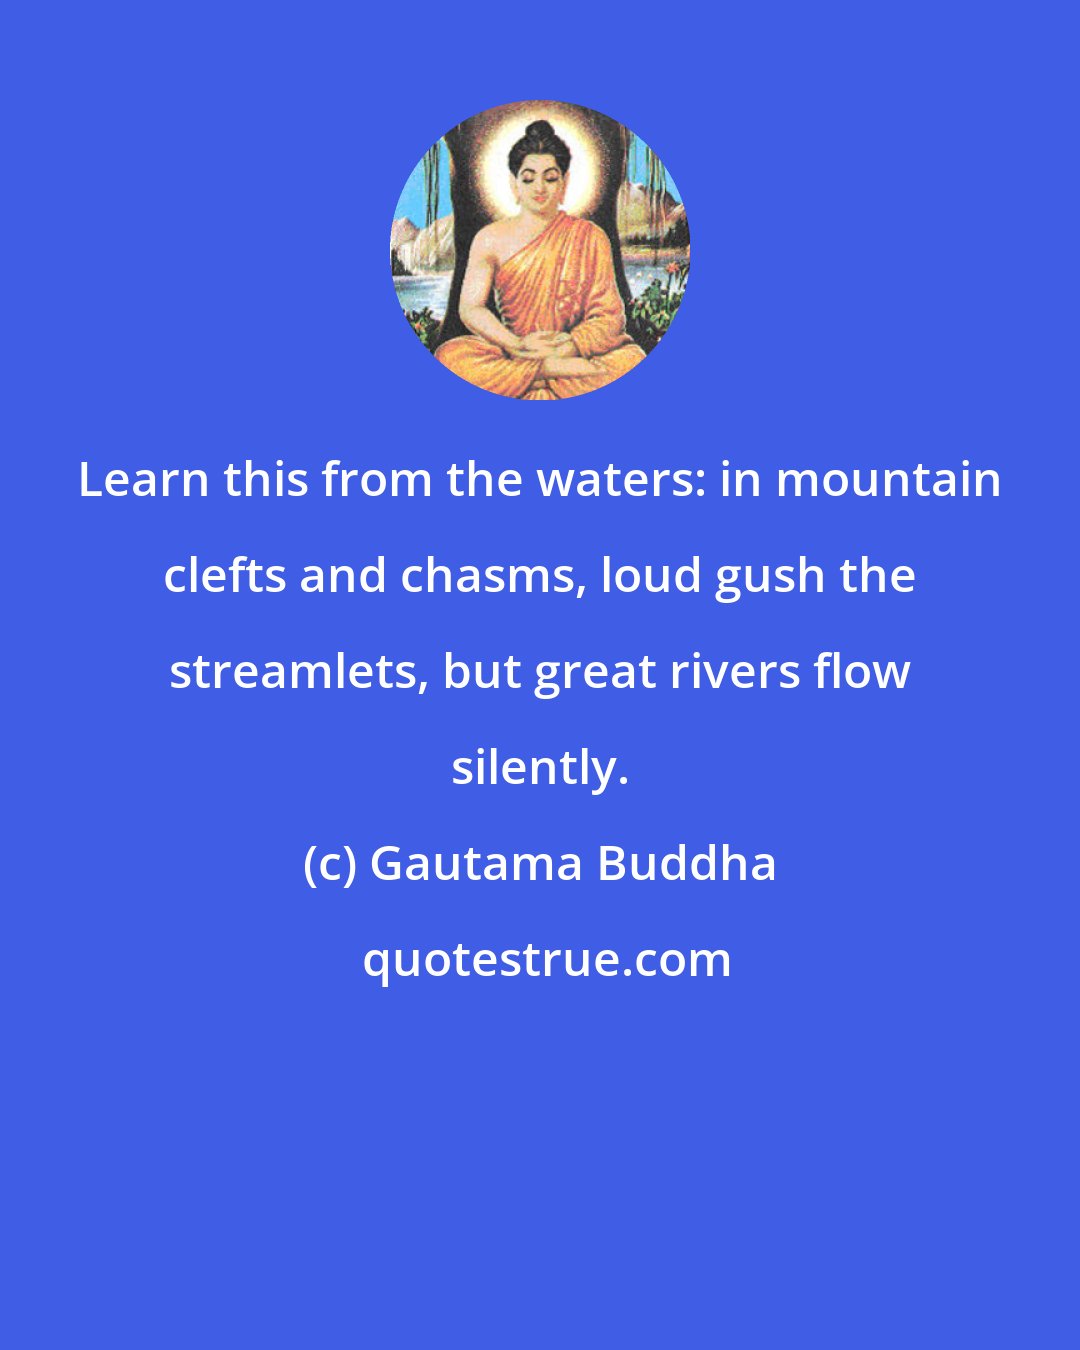 Gautama Buddha: Learn this from the waters: in mountain clefts and chasms, loud gush the streamlets, but great rivers flow silently.